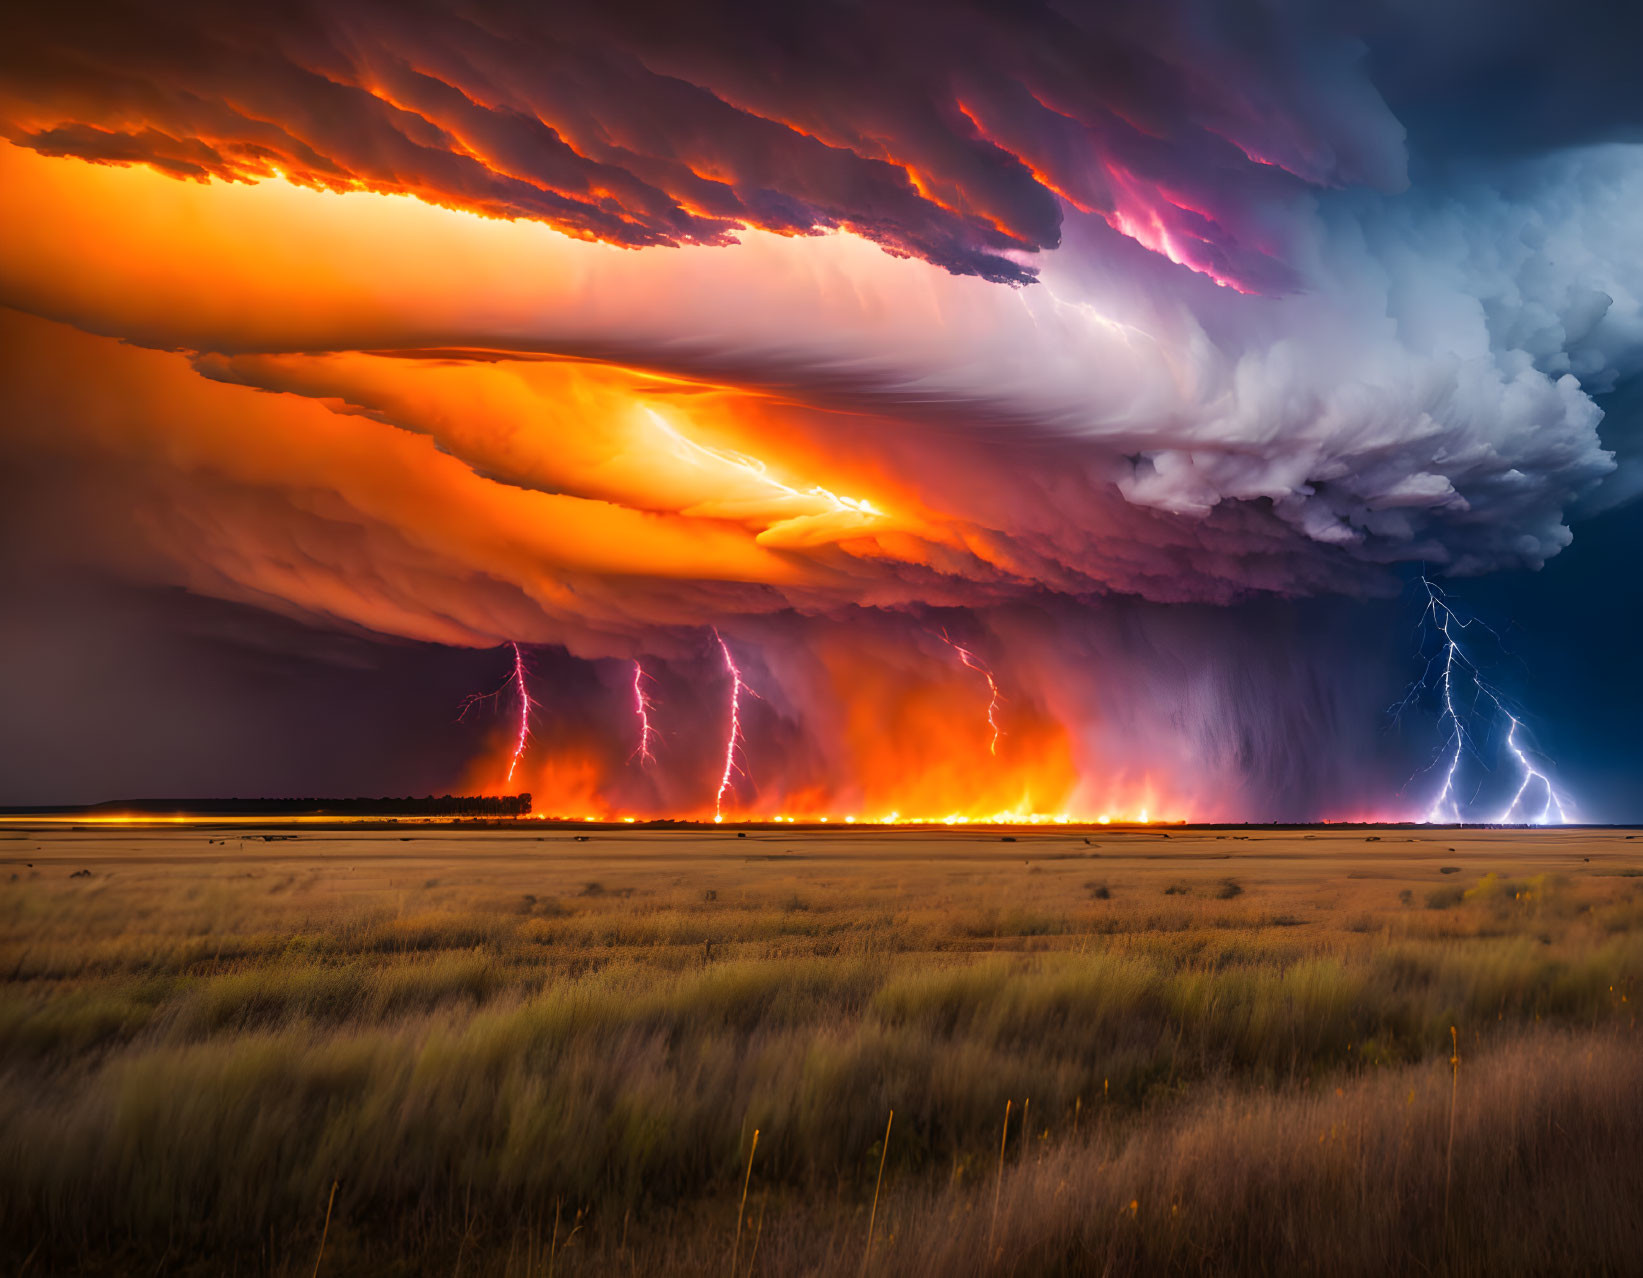 Dramatic thunderstorm with vibrant lightning striking fiery clouds at dusk